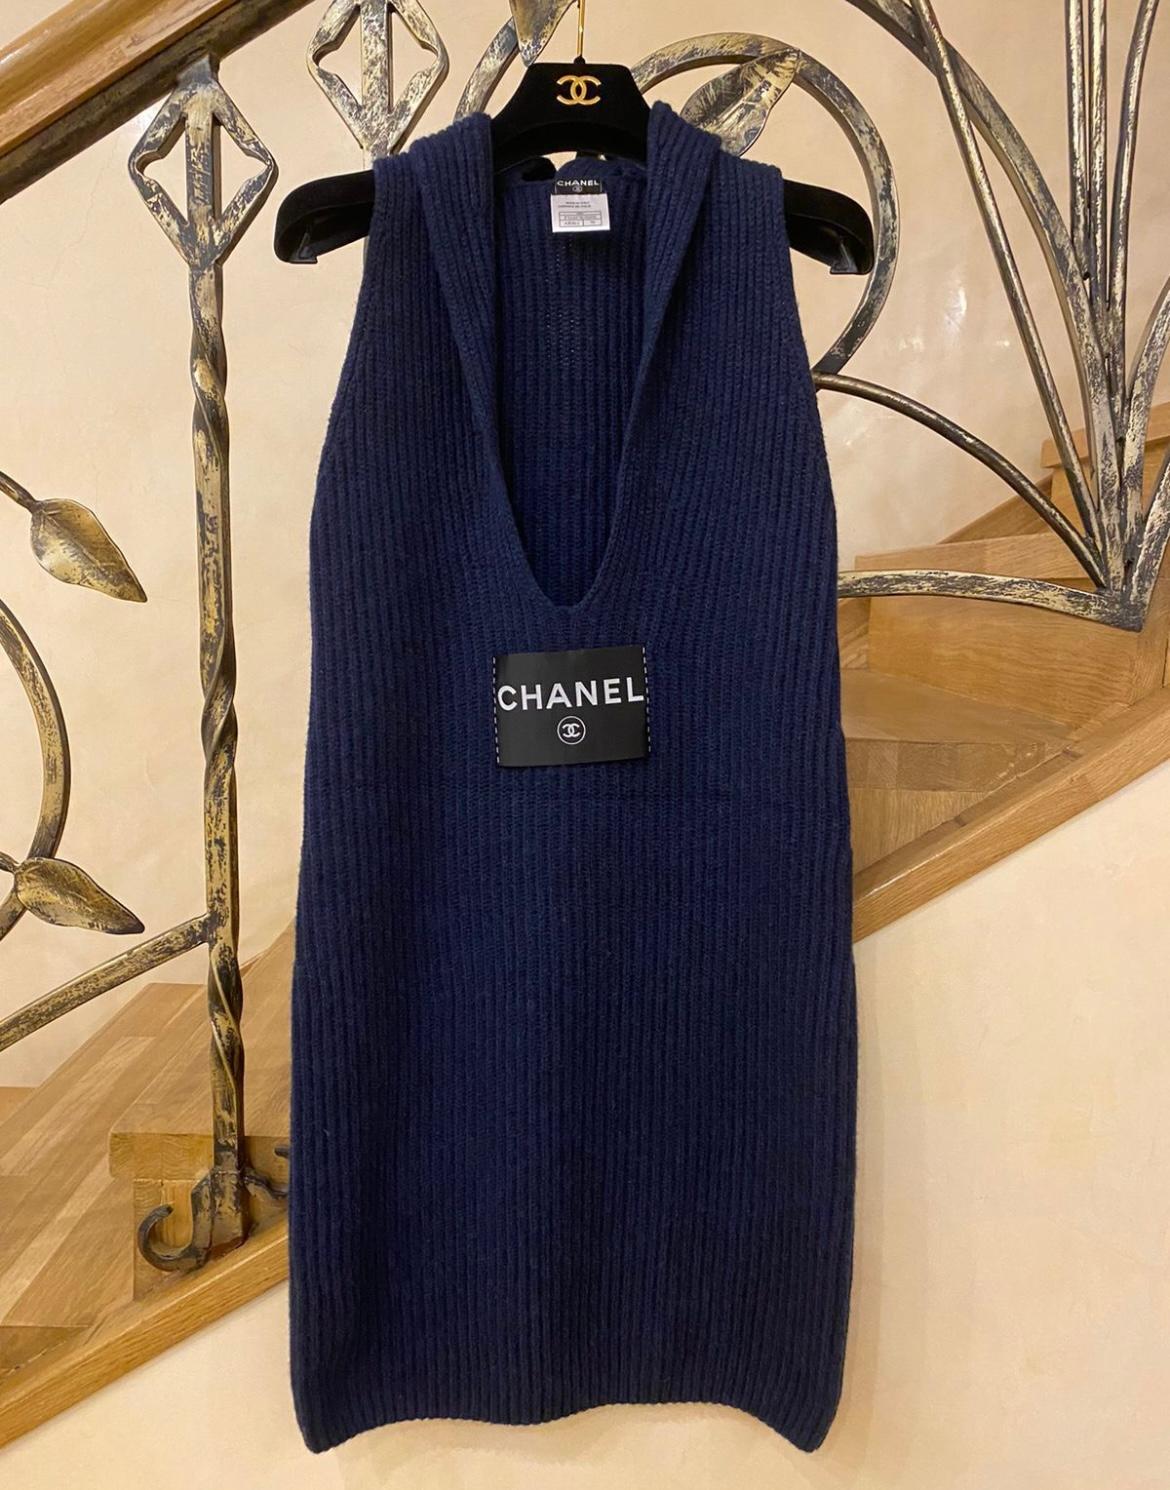 Chanel navy dress, size 36. Excellent condition.